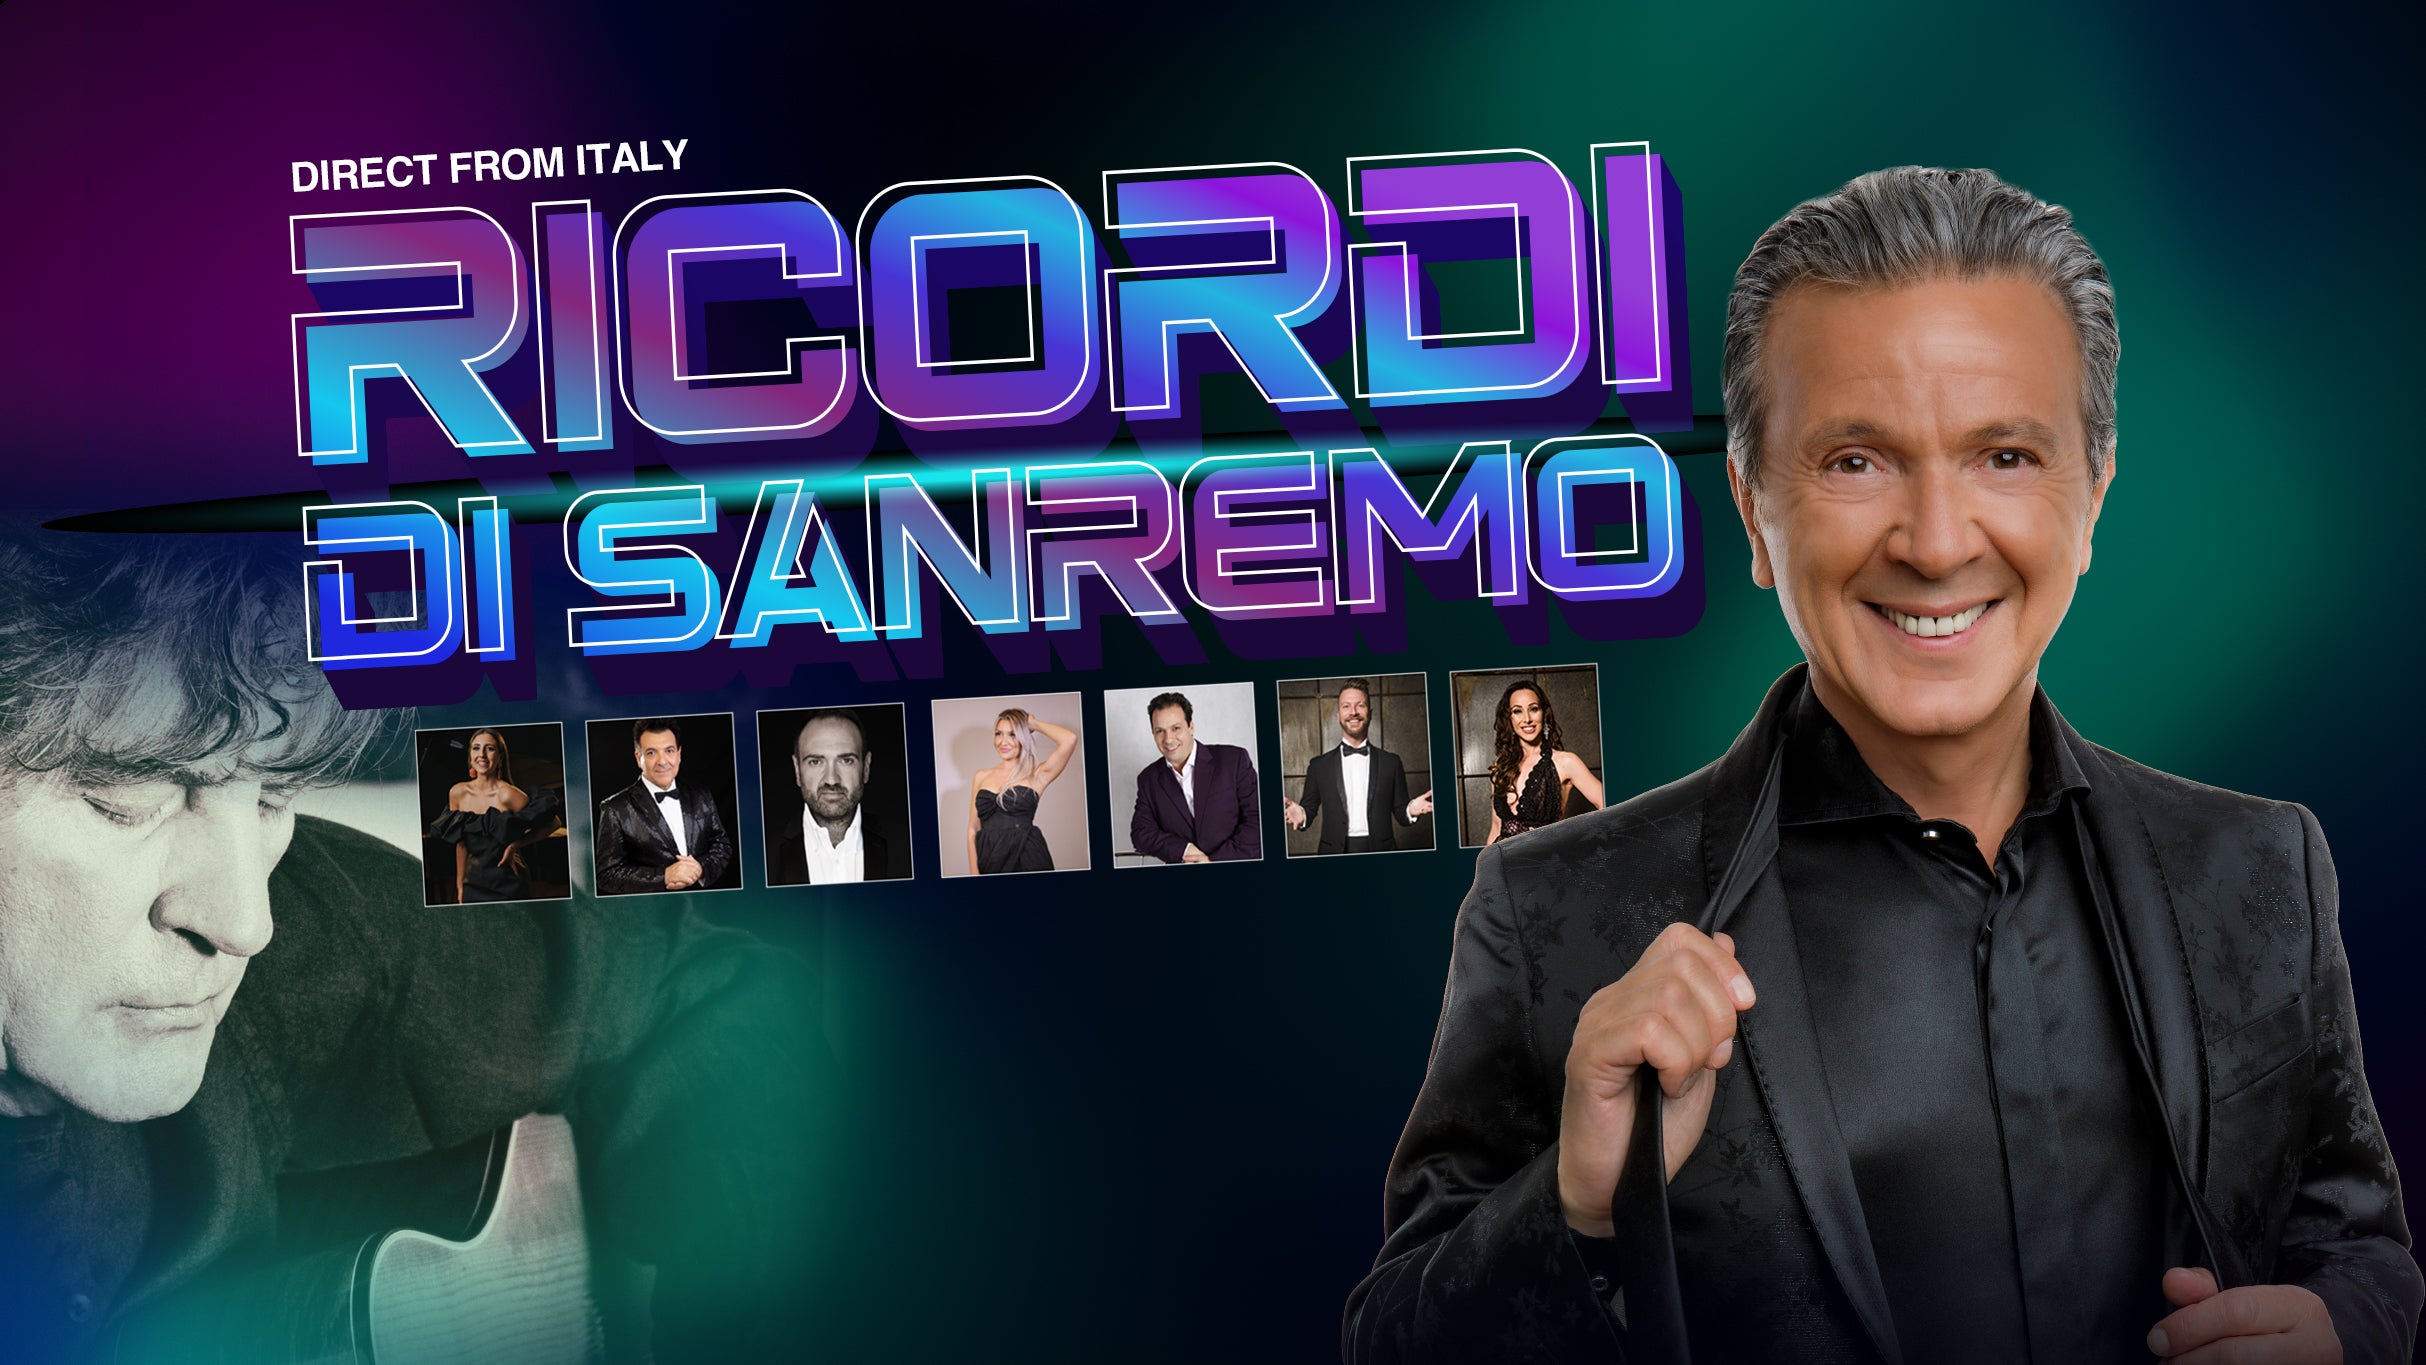 Image used with permission from Ticketmaster | Ricordi di Sanremo tickets